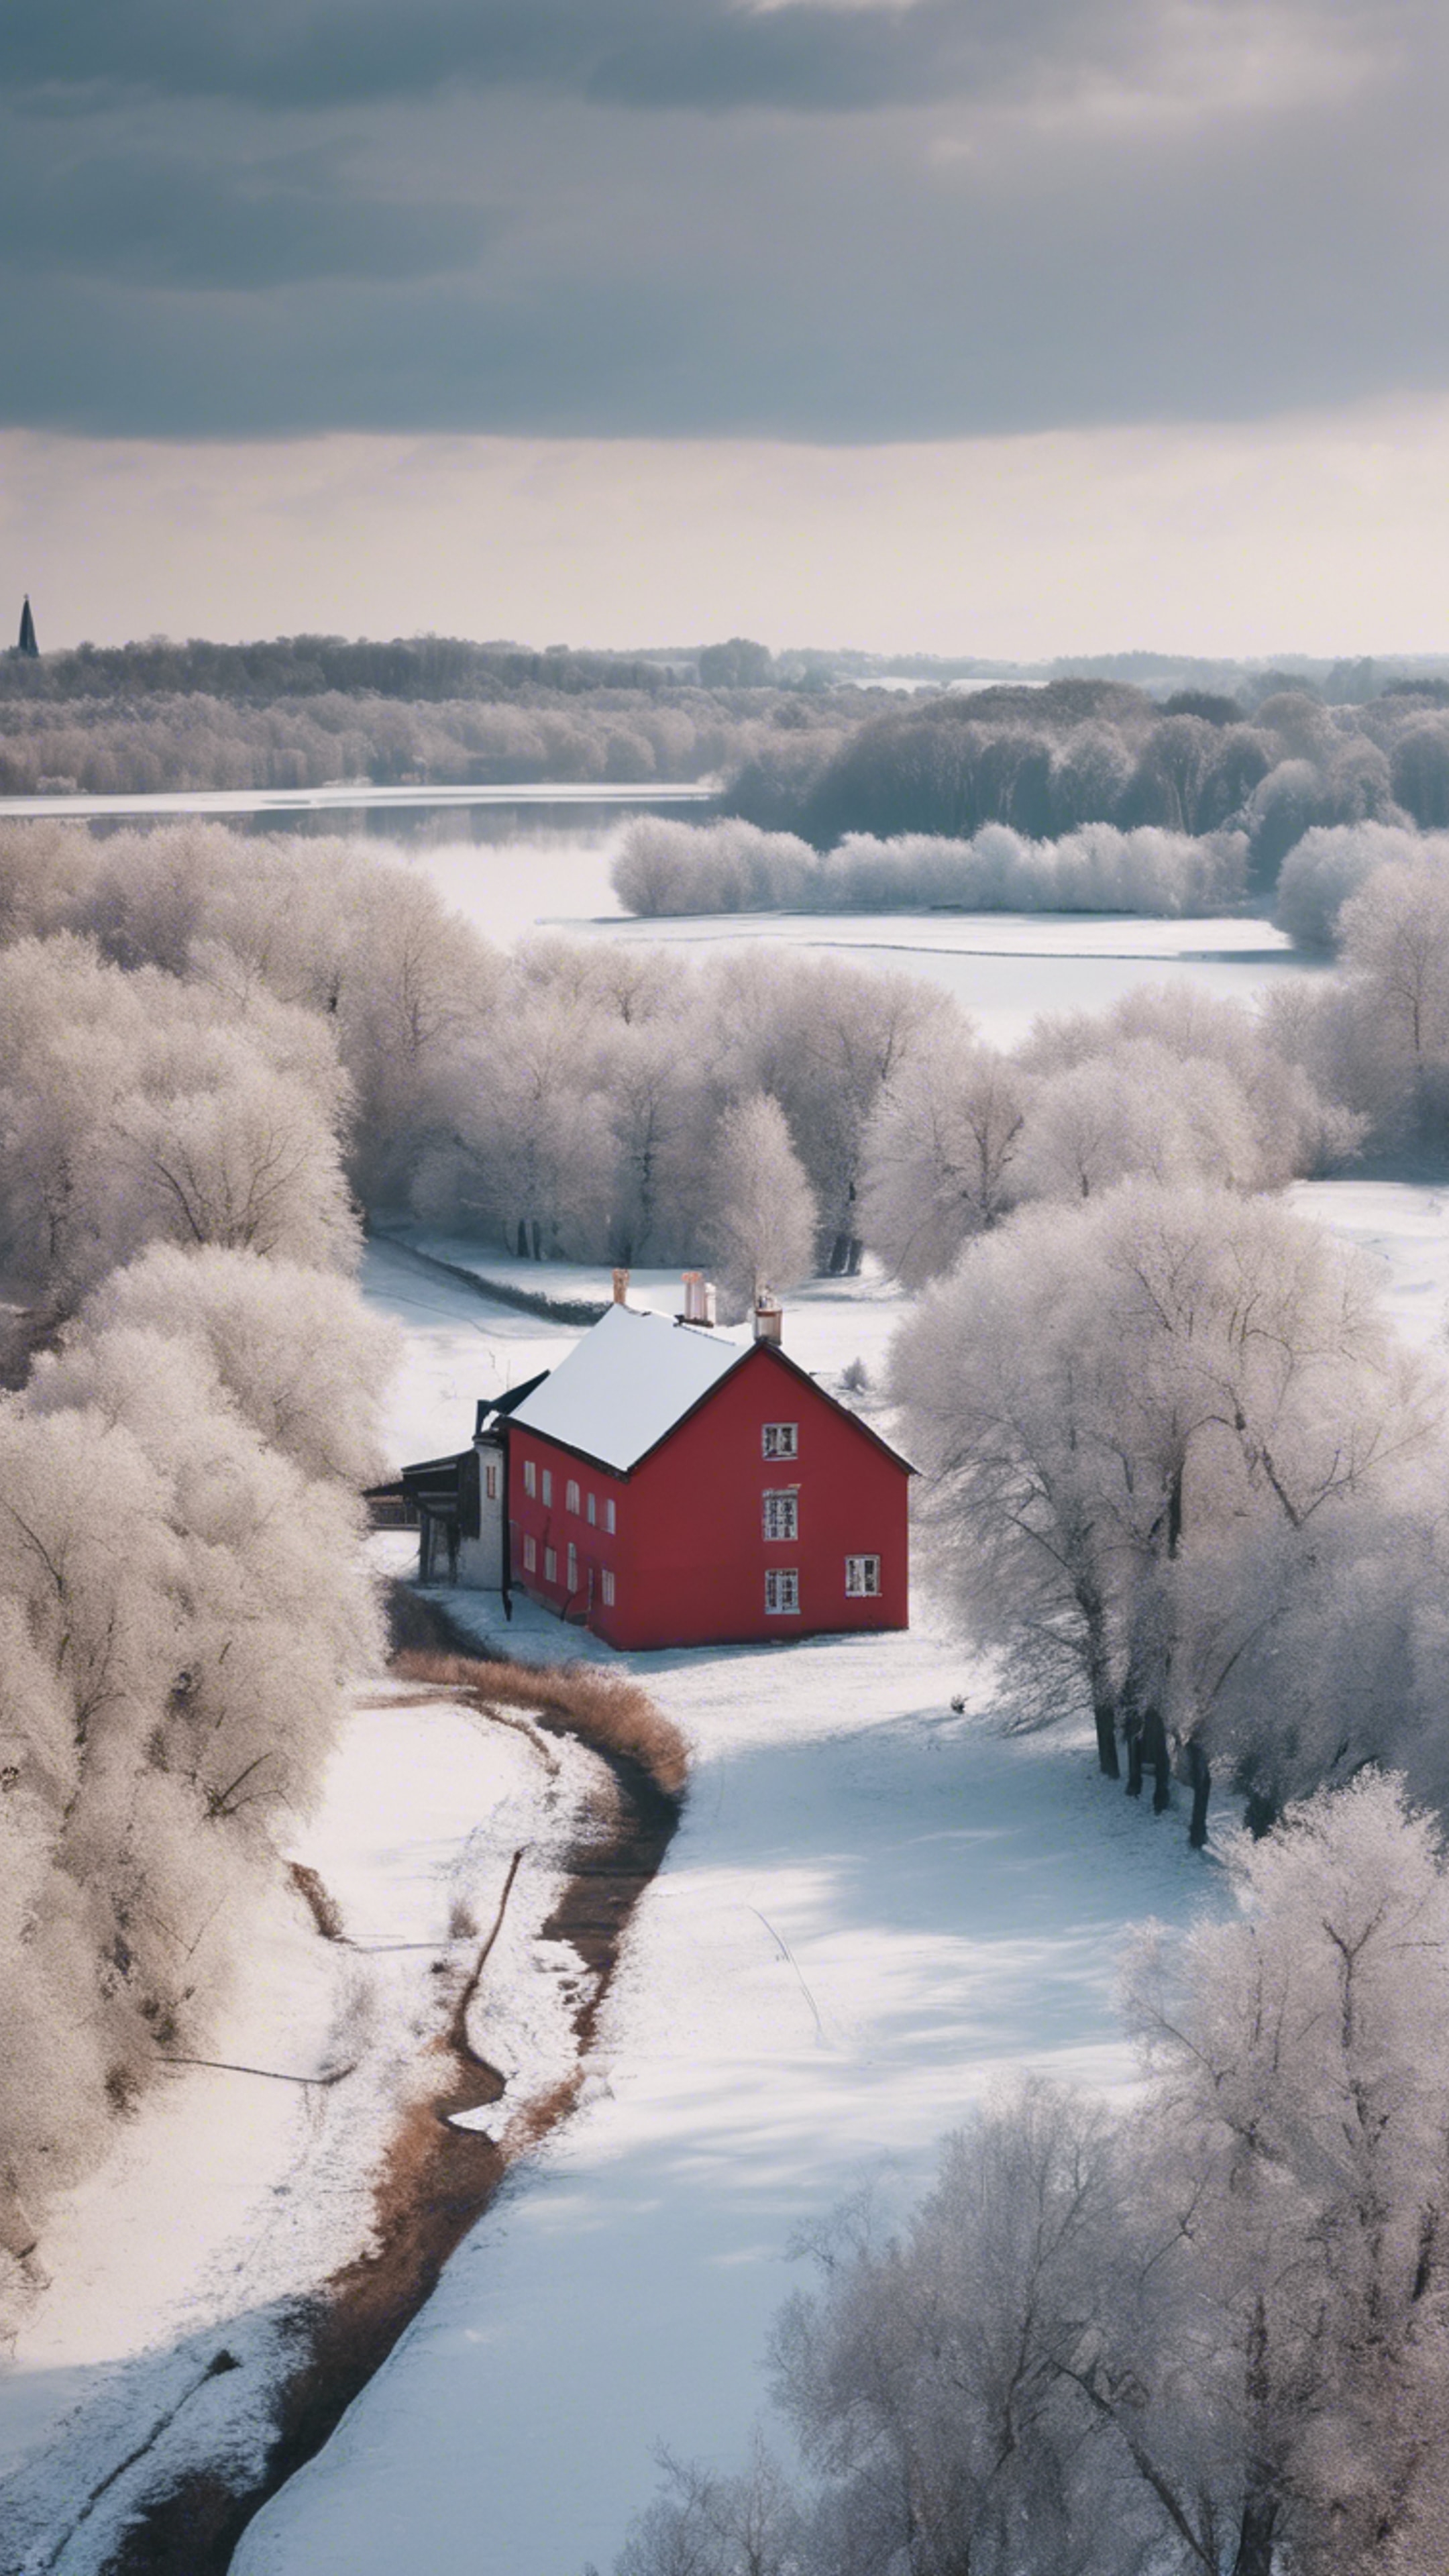 A snow-covered French country landscape with bare trees, a frozen river, and a small red-roofed house in the distance. Papel de parede[86a496d4055745a5962e]